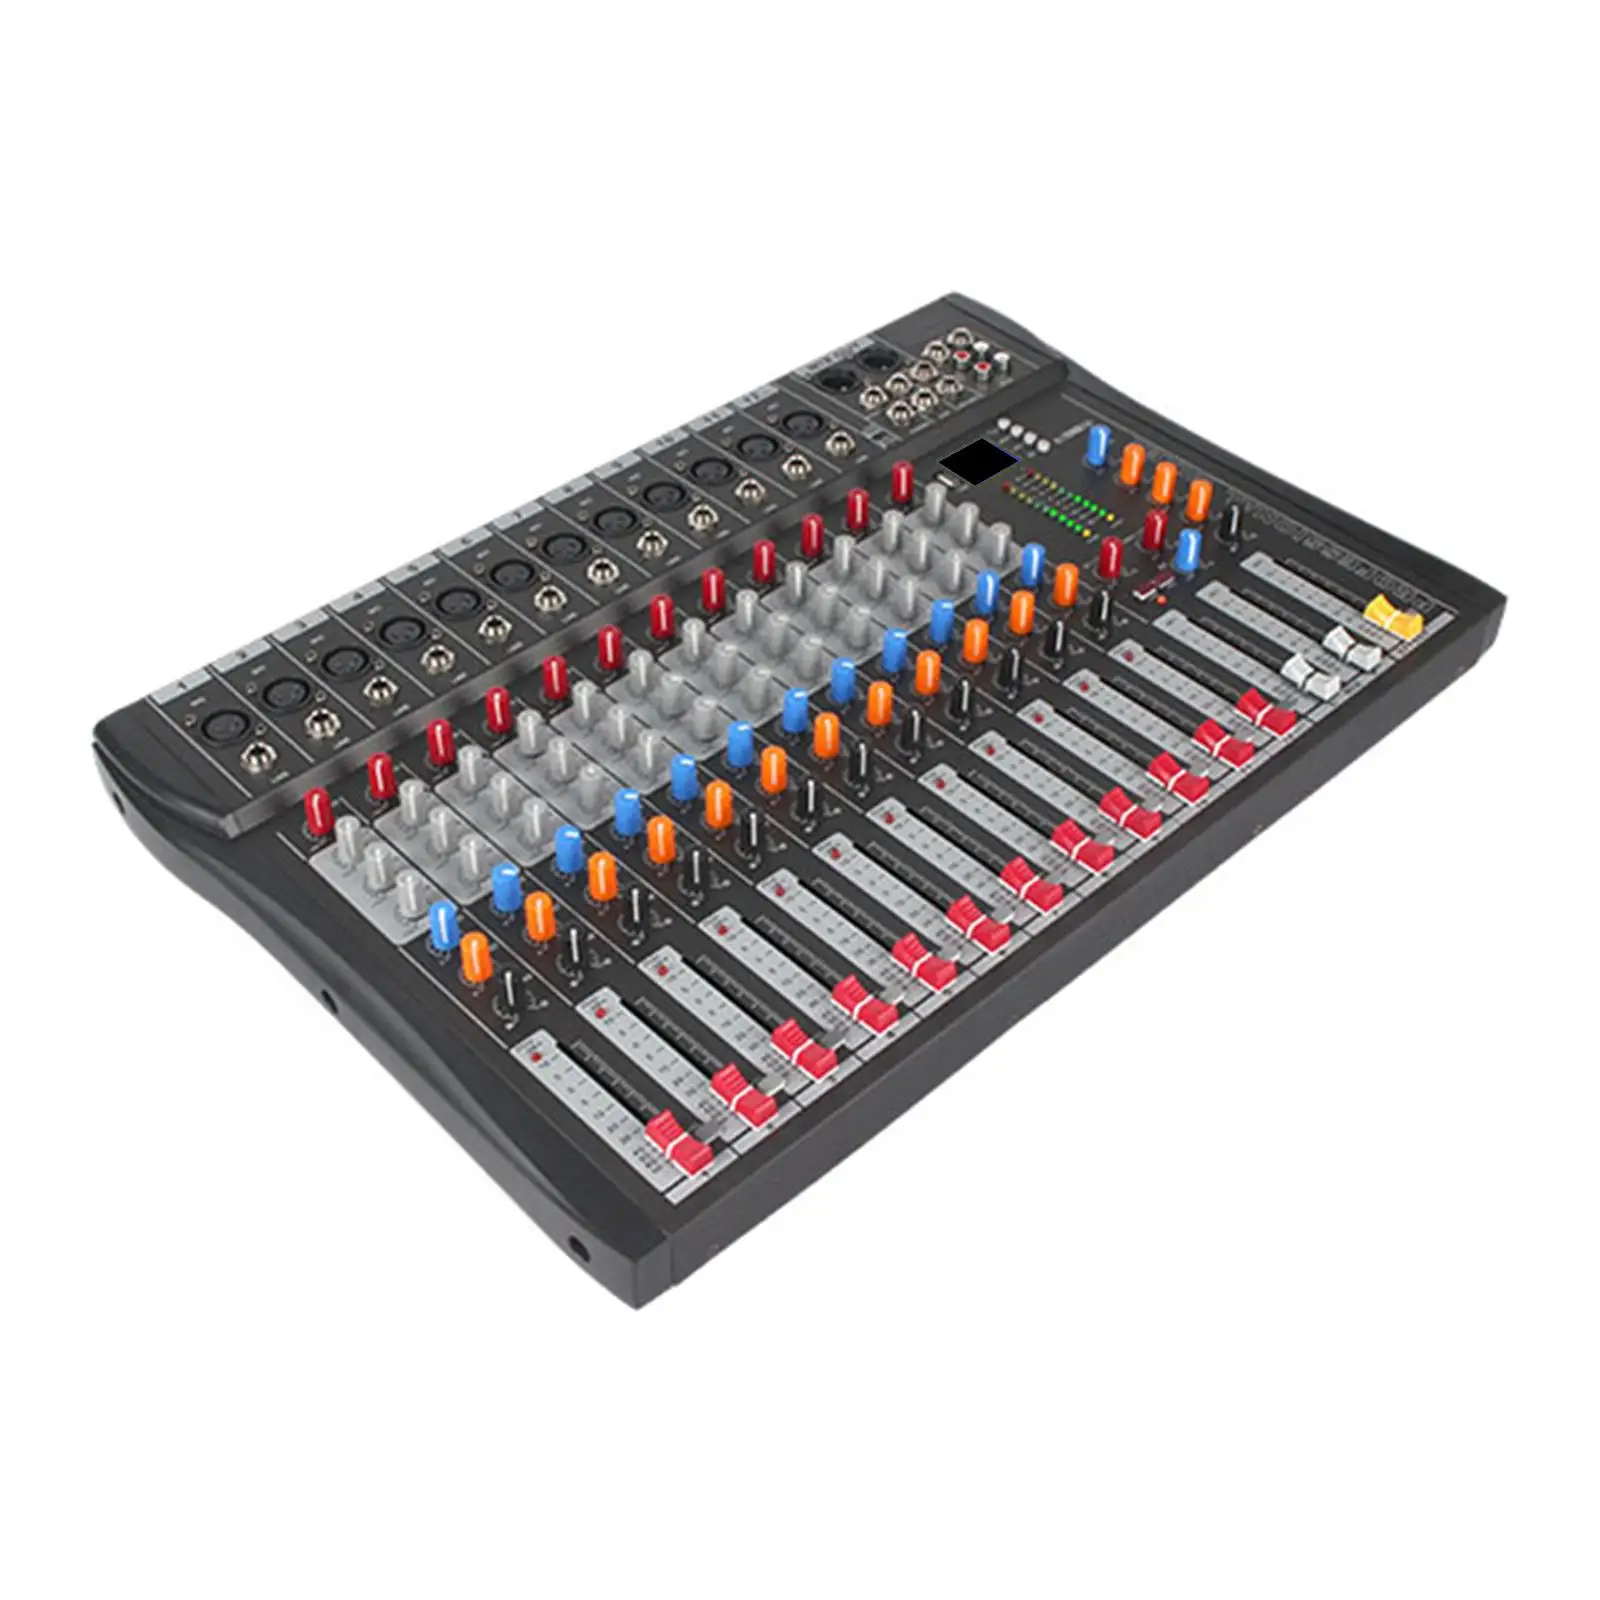 

12 Channels Audio Mixer LCD Screen MP3 48V Lightweight DJ Sound Controller for PC Recording Input Karaoke Interface Mixing Board